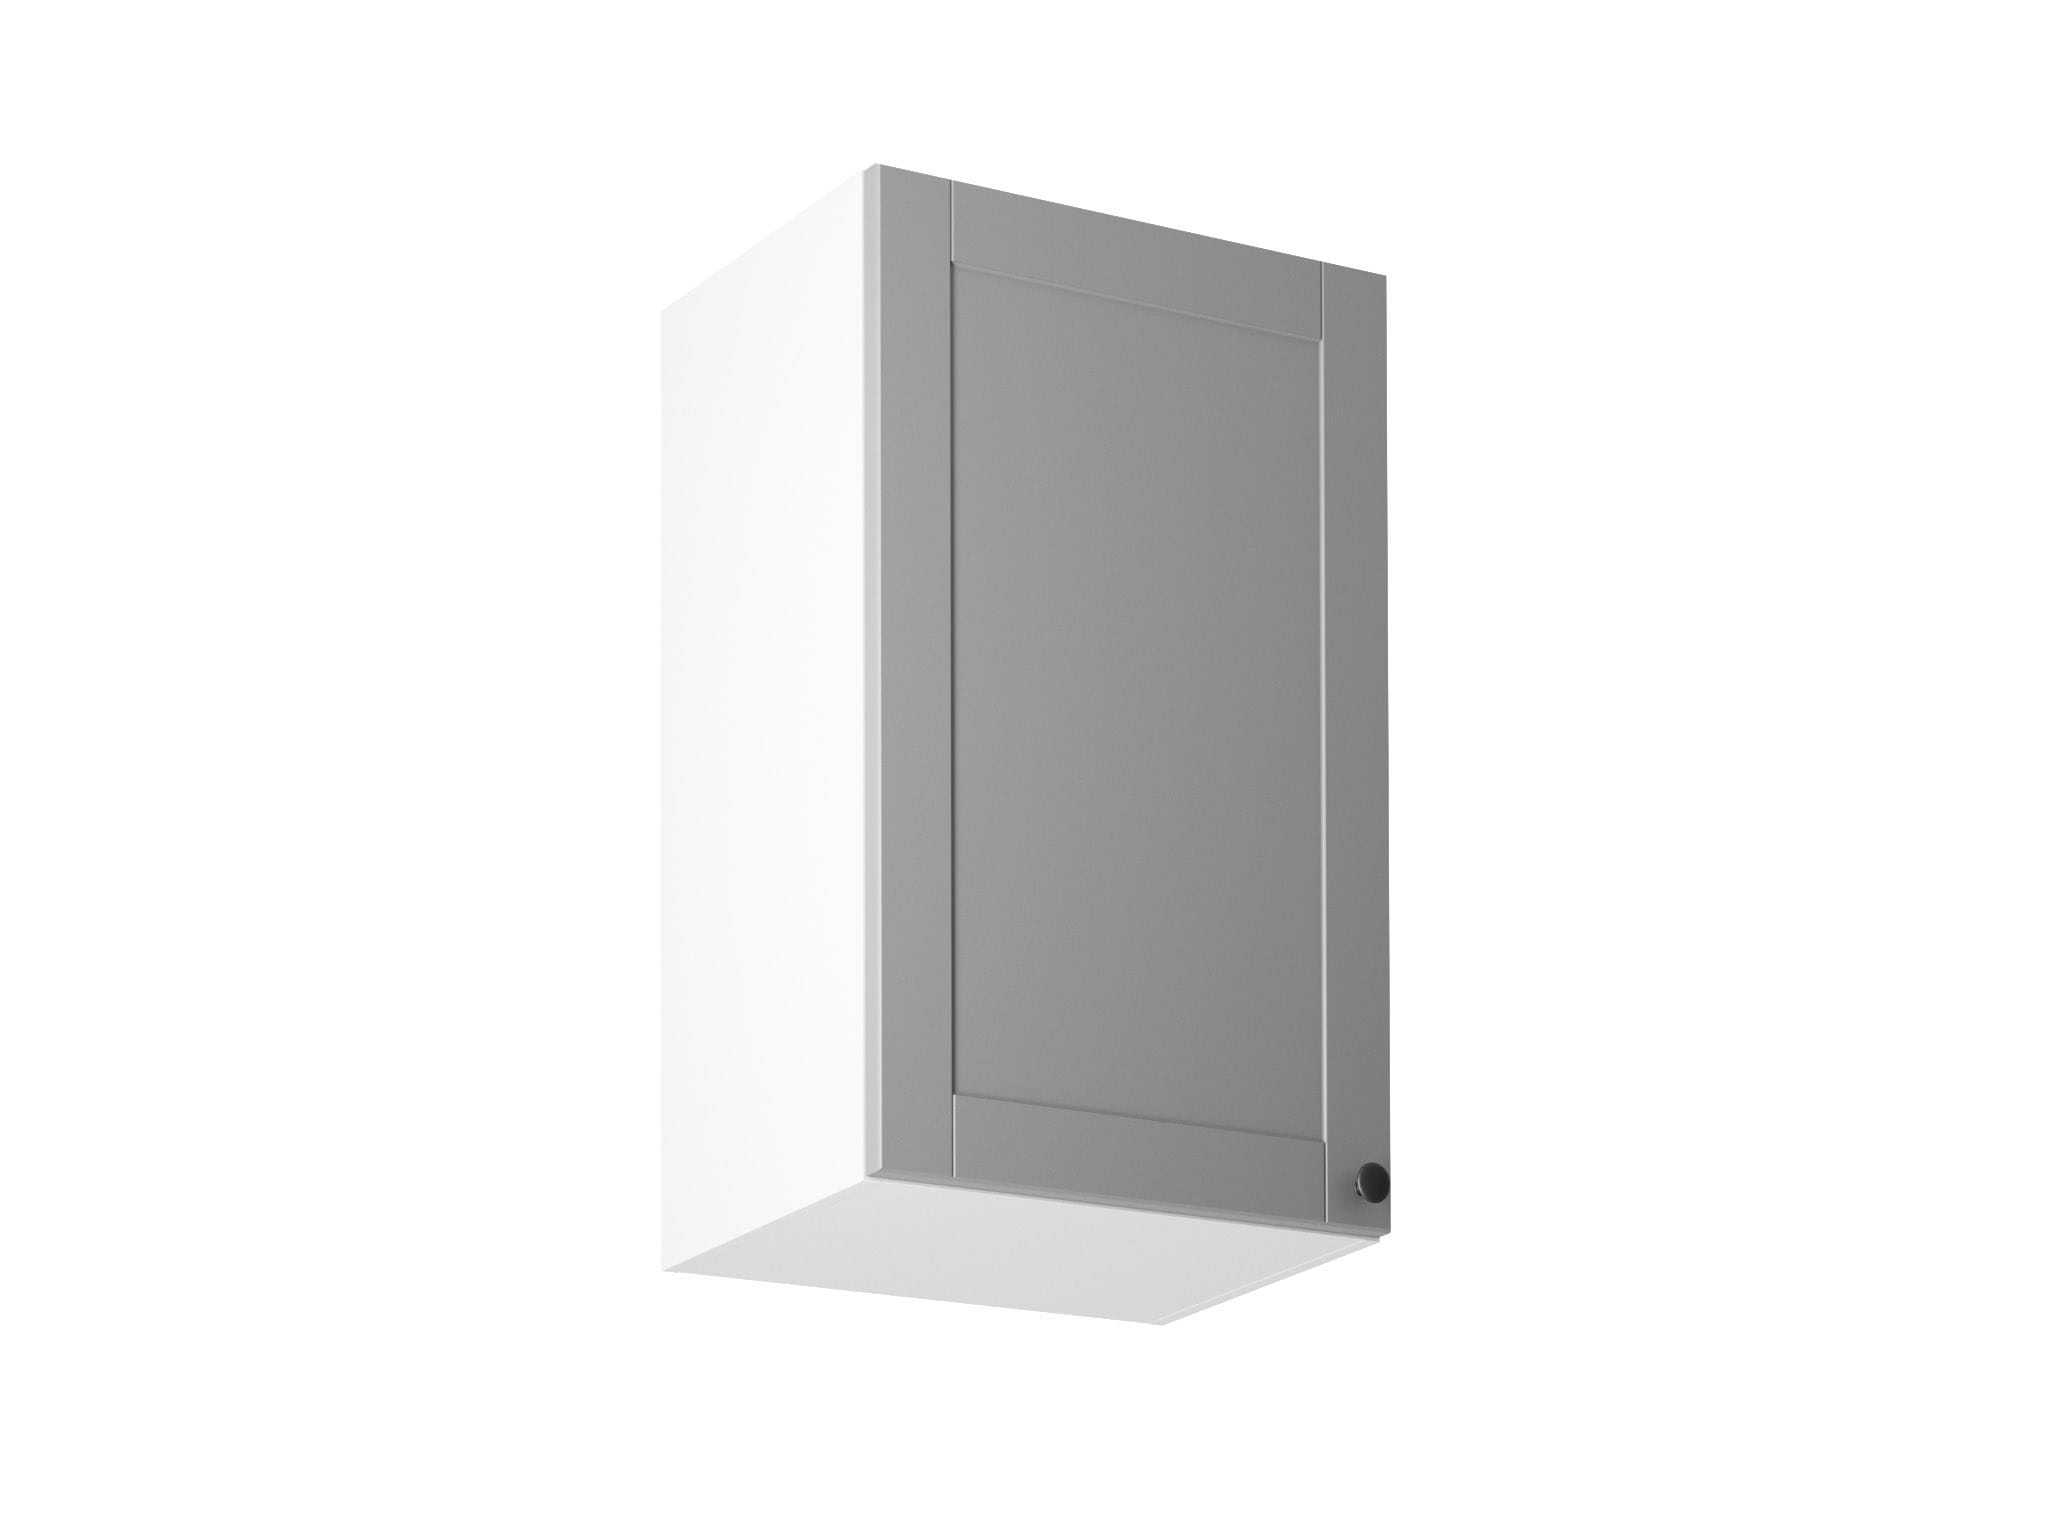 WALL CABINET FOR THE KITCHEN IN WHITE MODERN STYLE G45